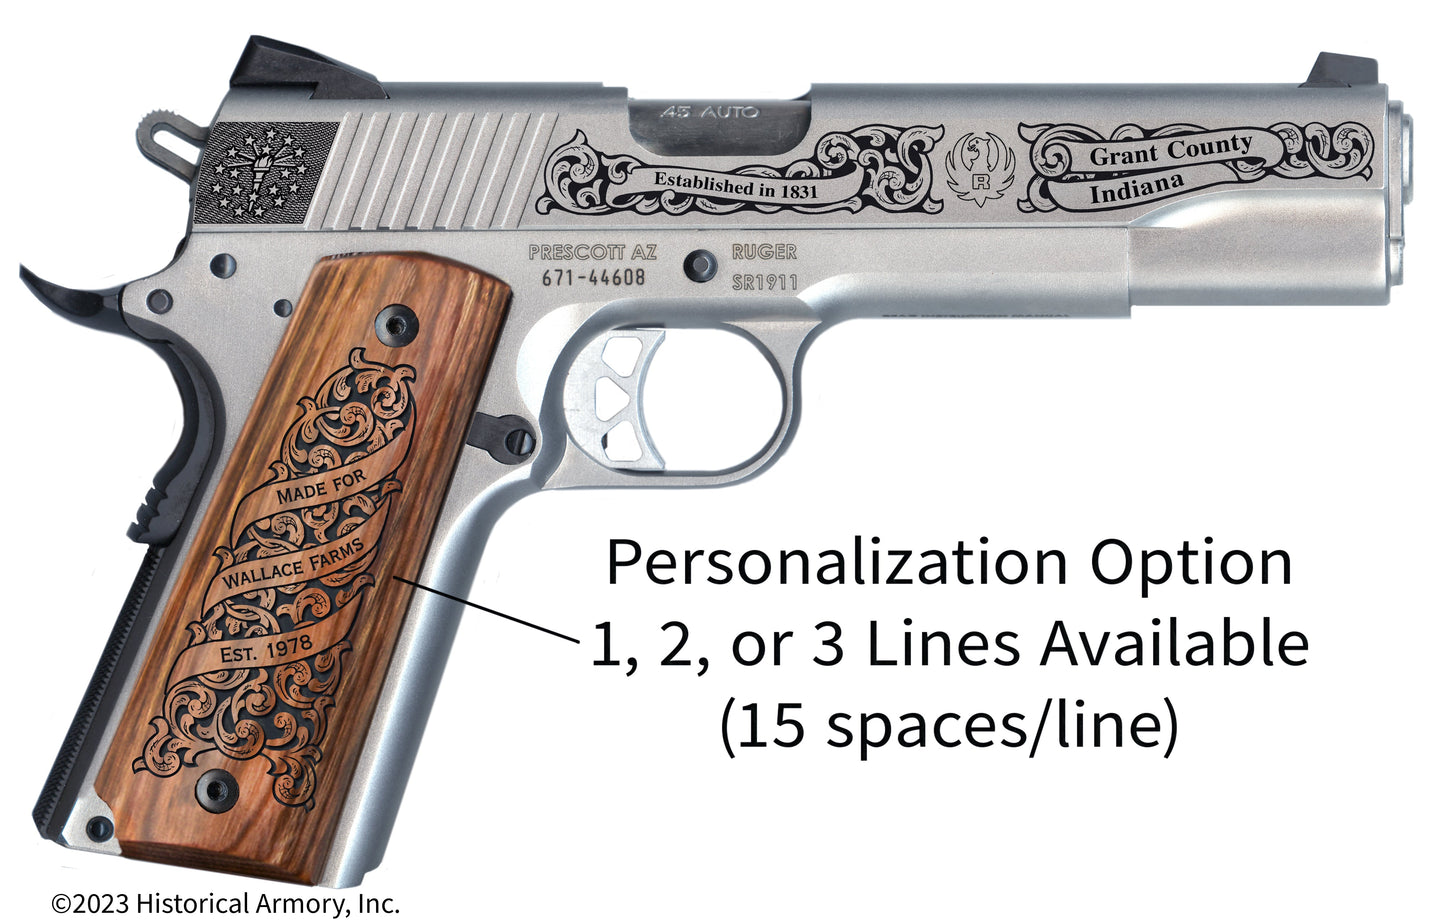 Grant County Indiana Personalized Engraved .45 Auto Ruger 1911